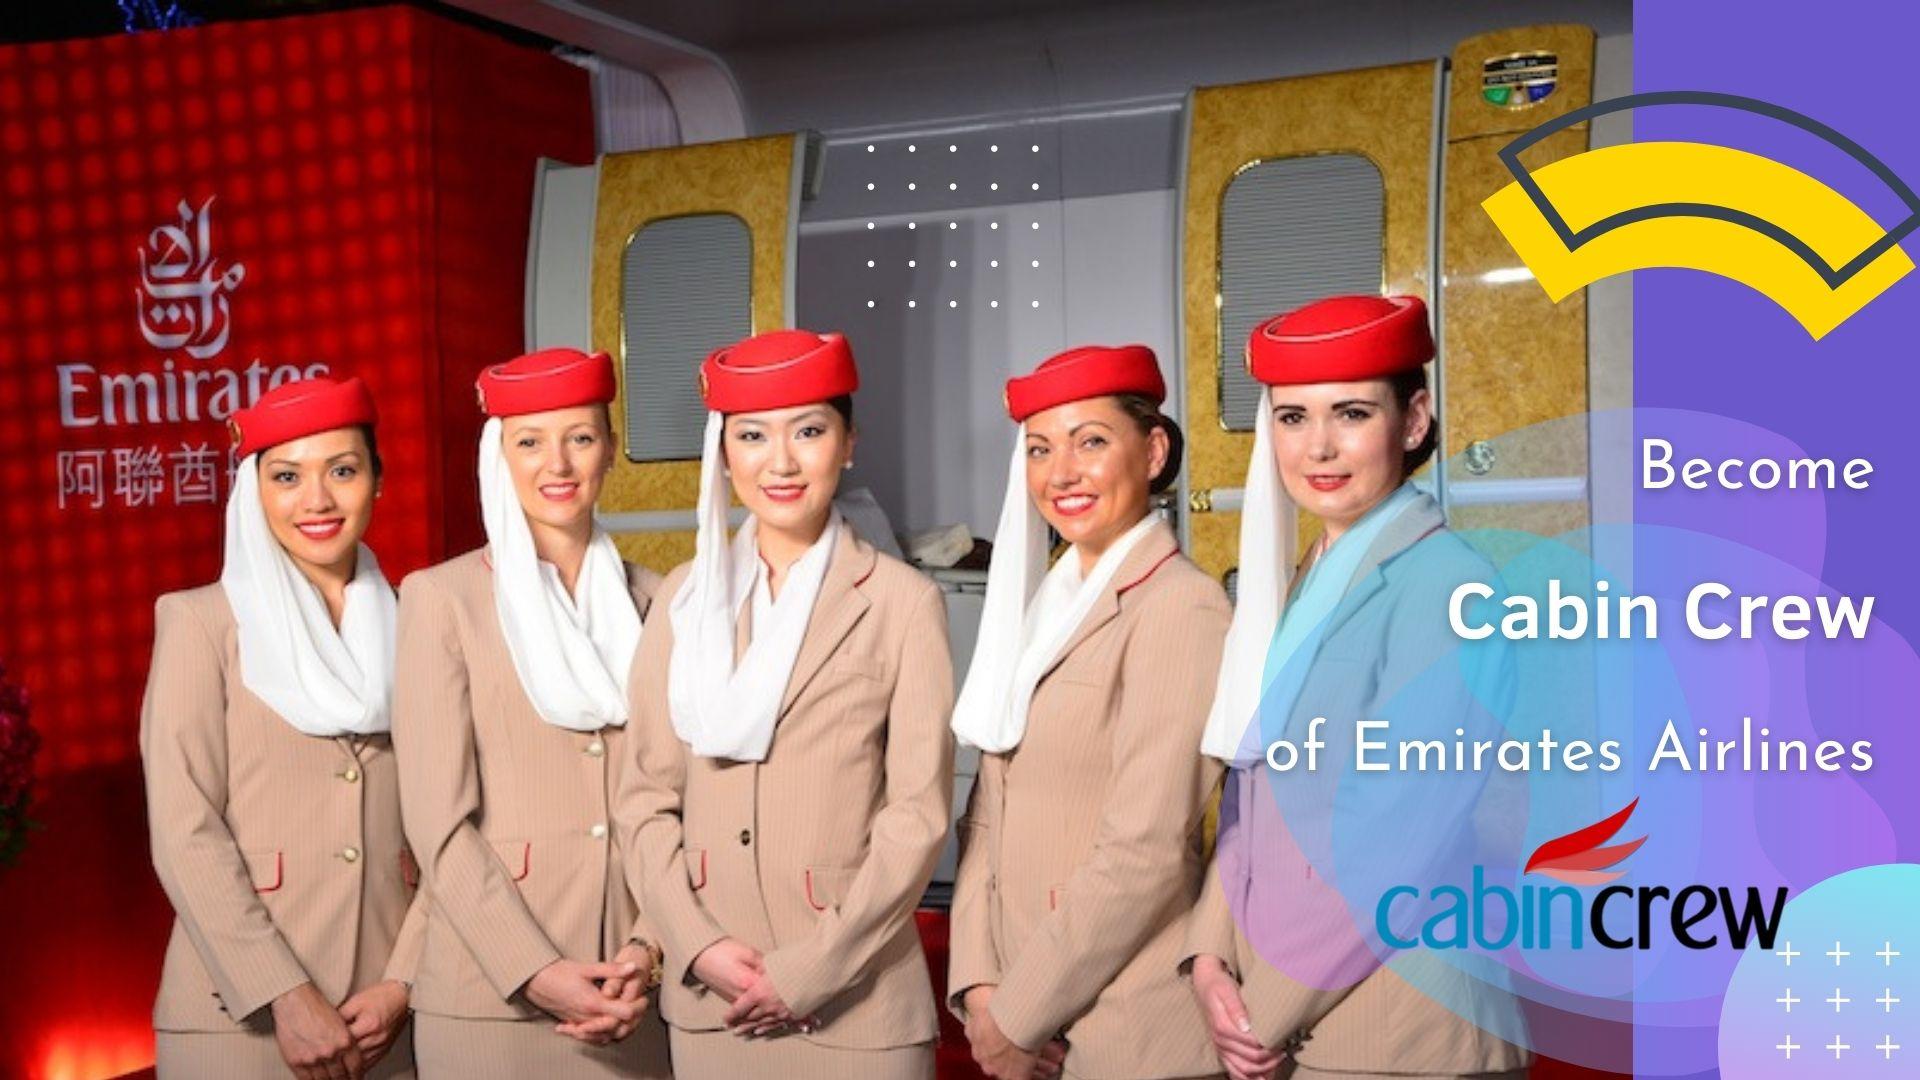 Emirates-Airlines-cabin-crew-interview-12